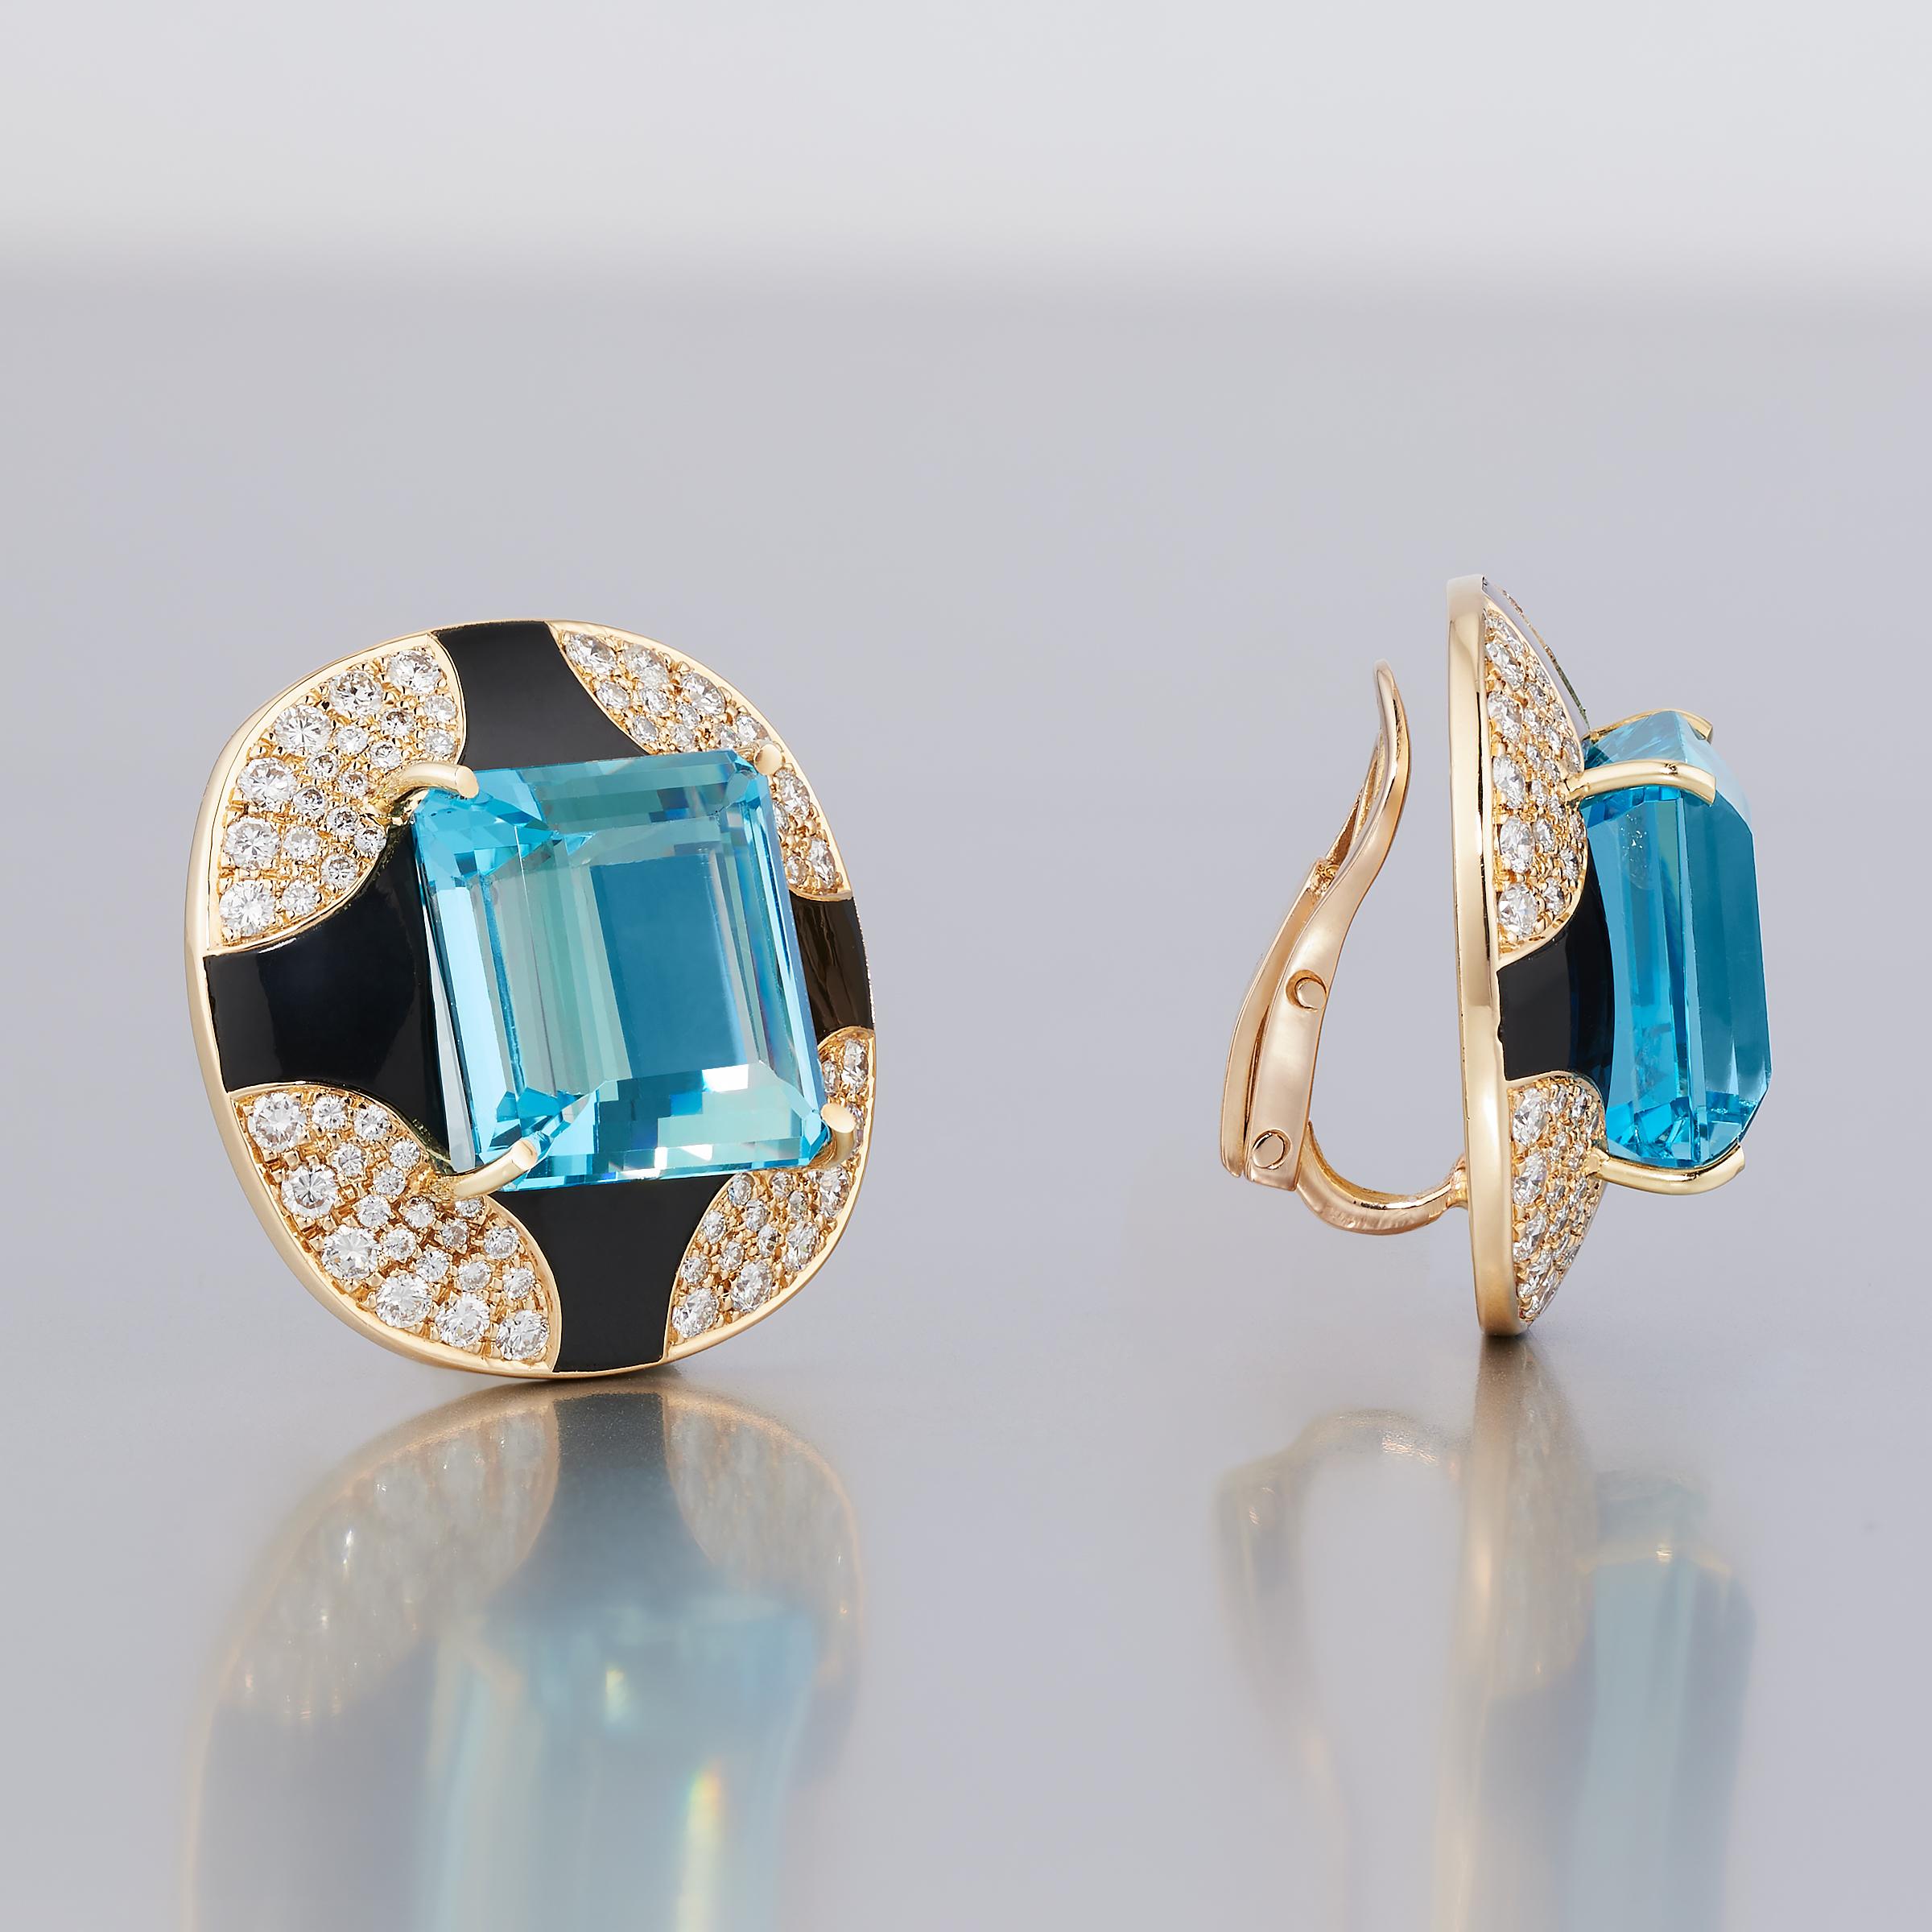 Exceptional one-of-a-kind large aquamarine diamond and black onyx earrings attributed to Mauboussin Paris and set in 18 karat yellow gold. These impressive earrings are a vintage creation dating to 1980s and are emblematic of the bold French